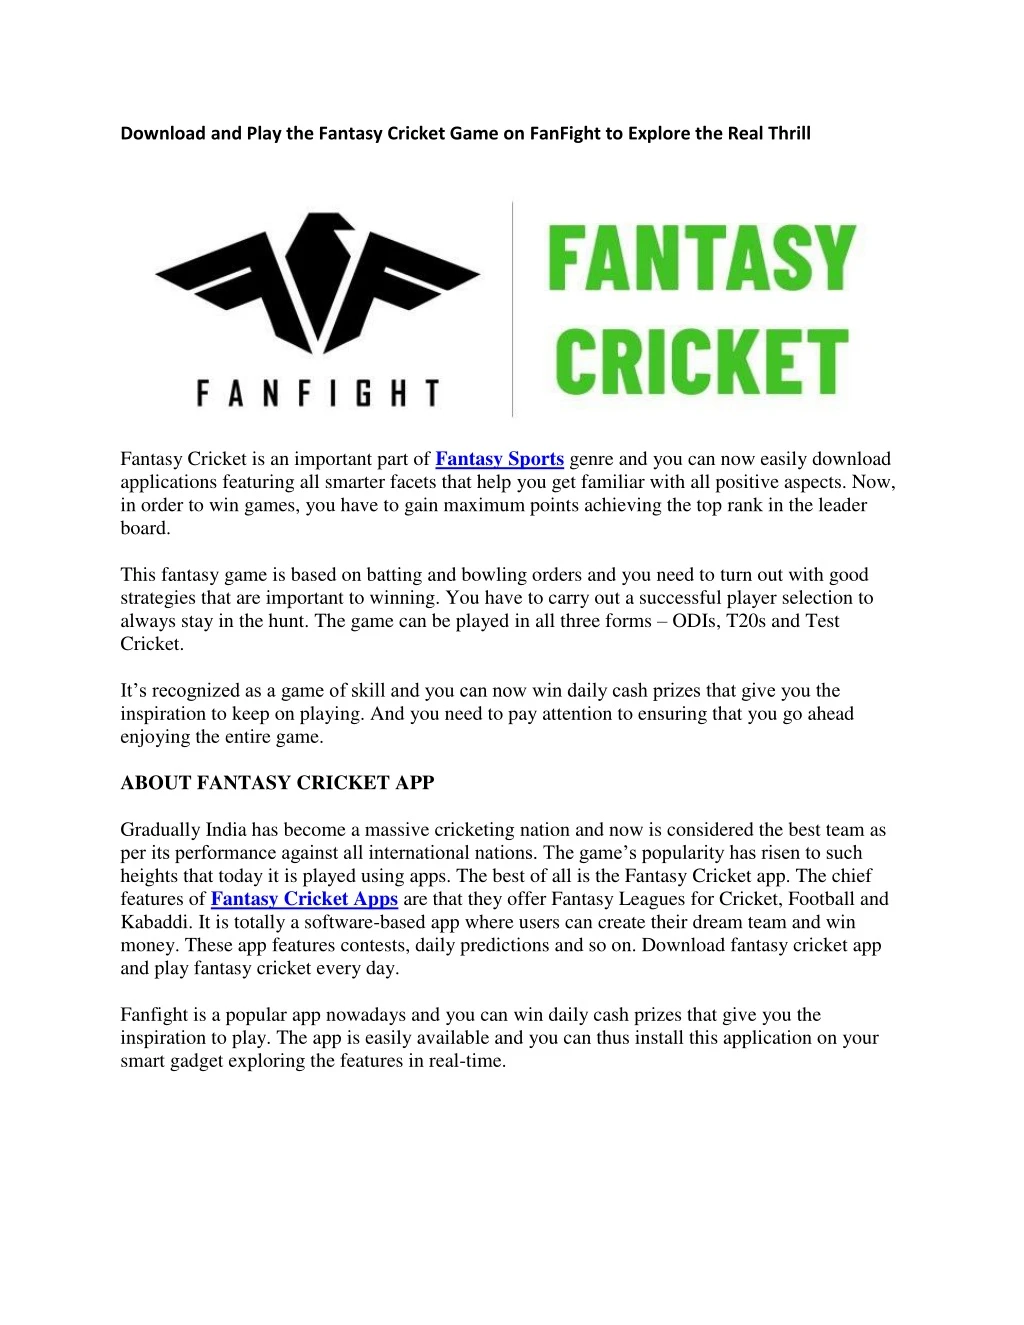 download and play the fantasy cricket game